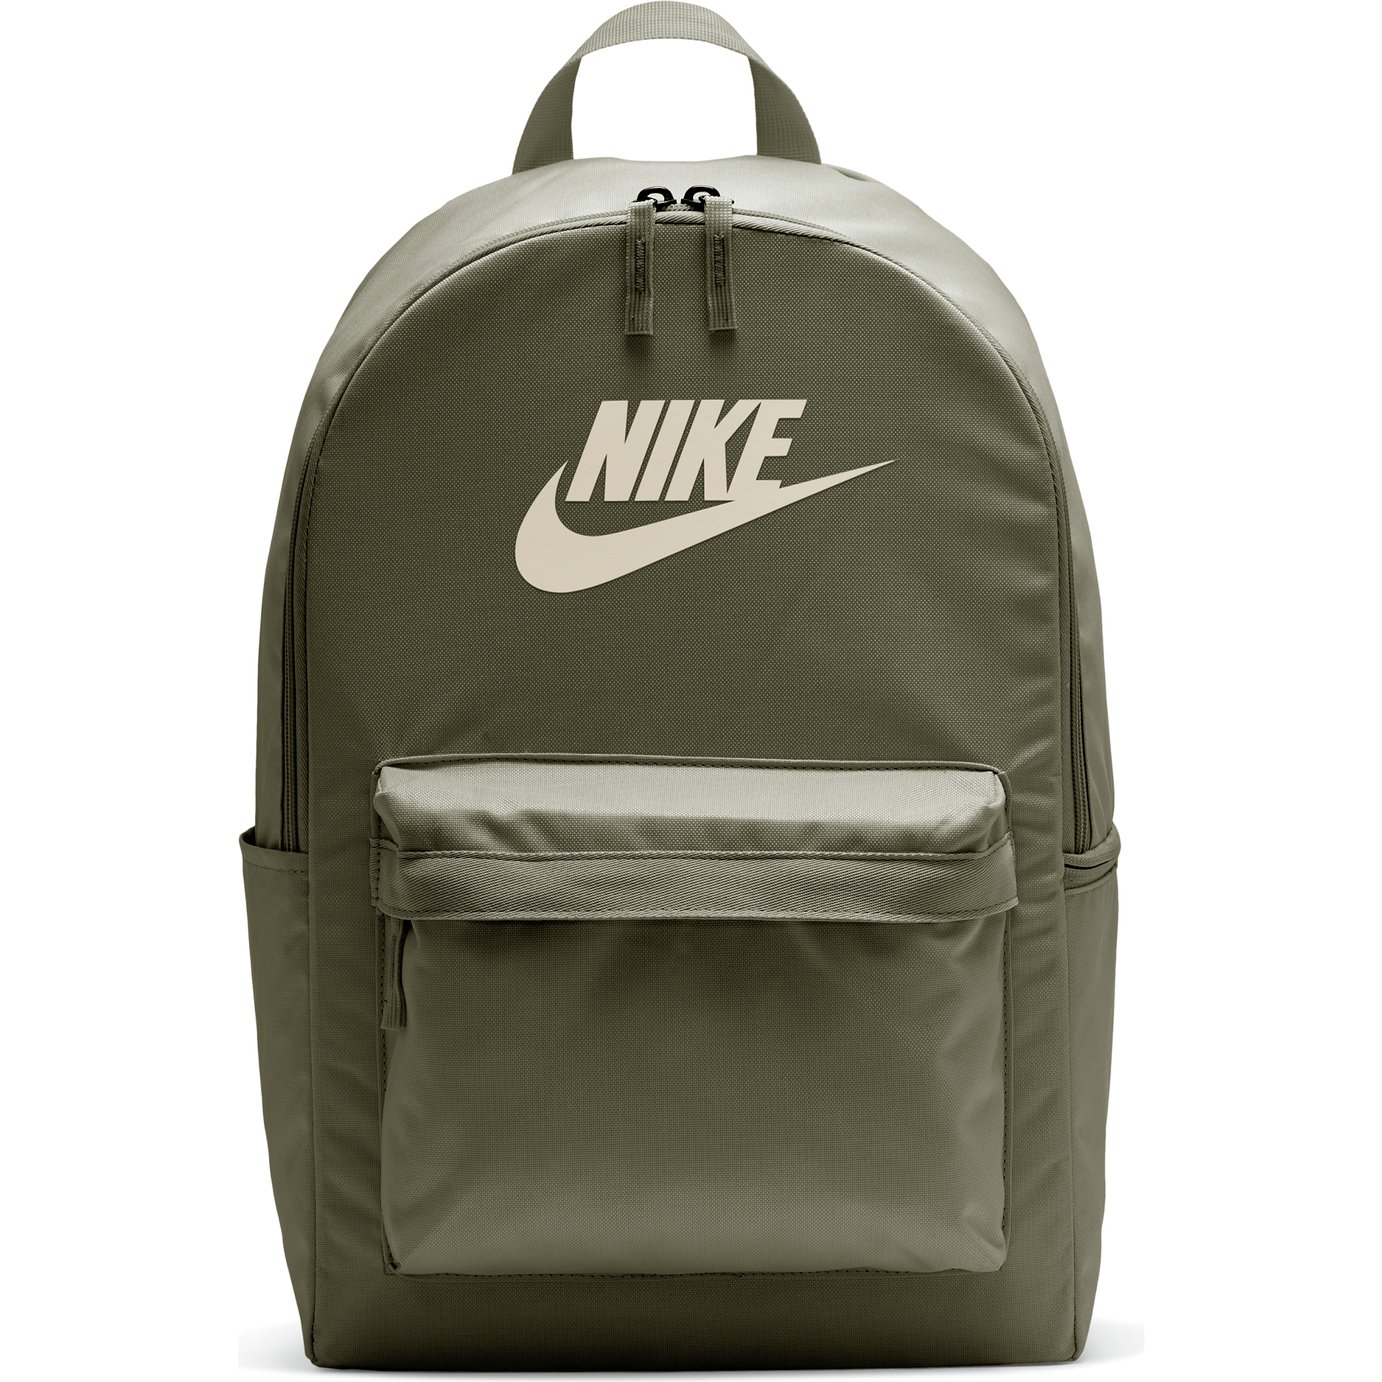 Nike Heritage 2.0 25L Backpack Review